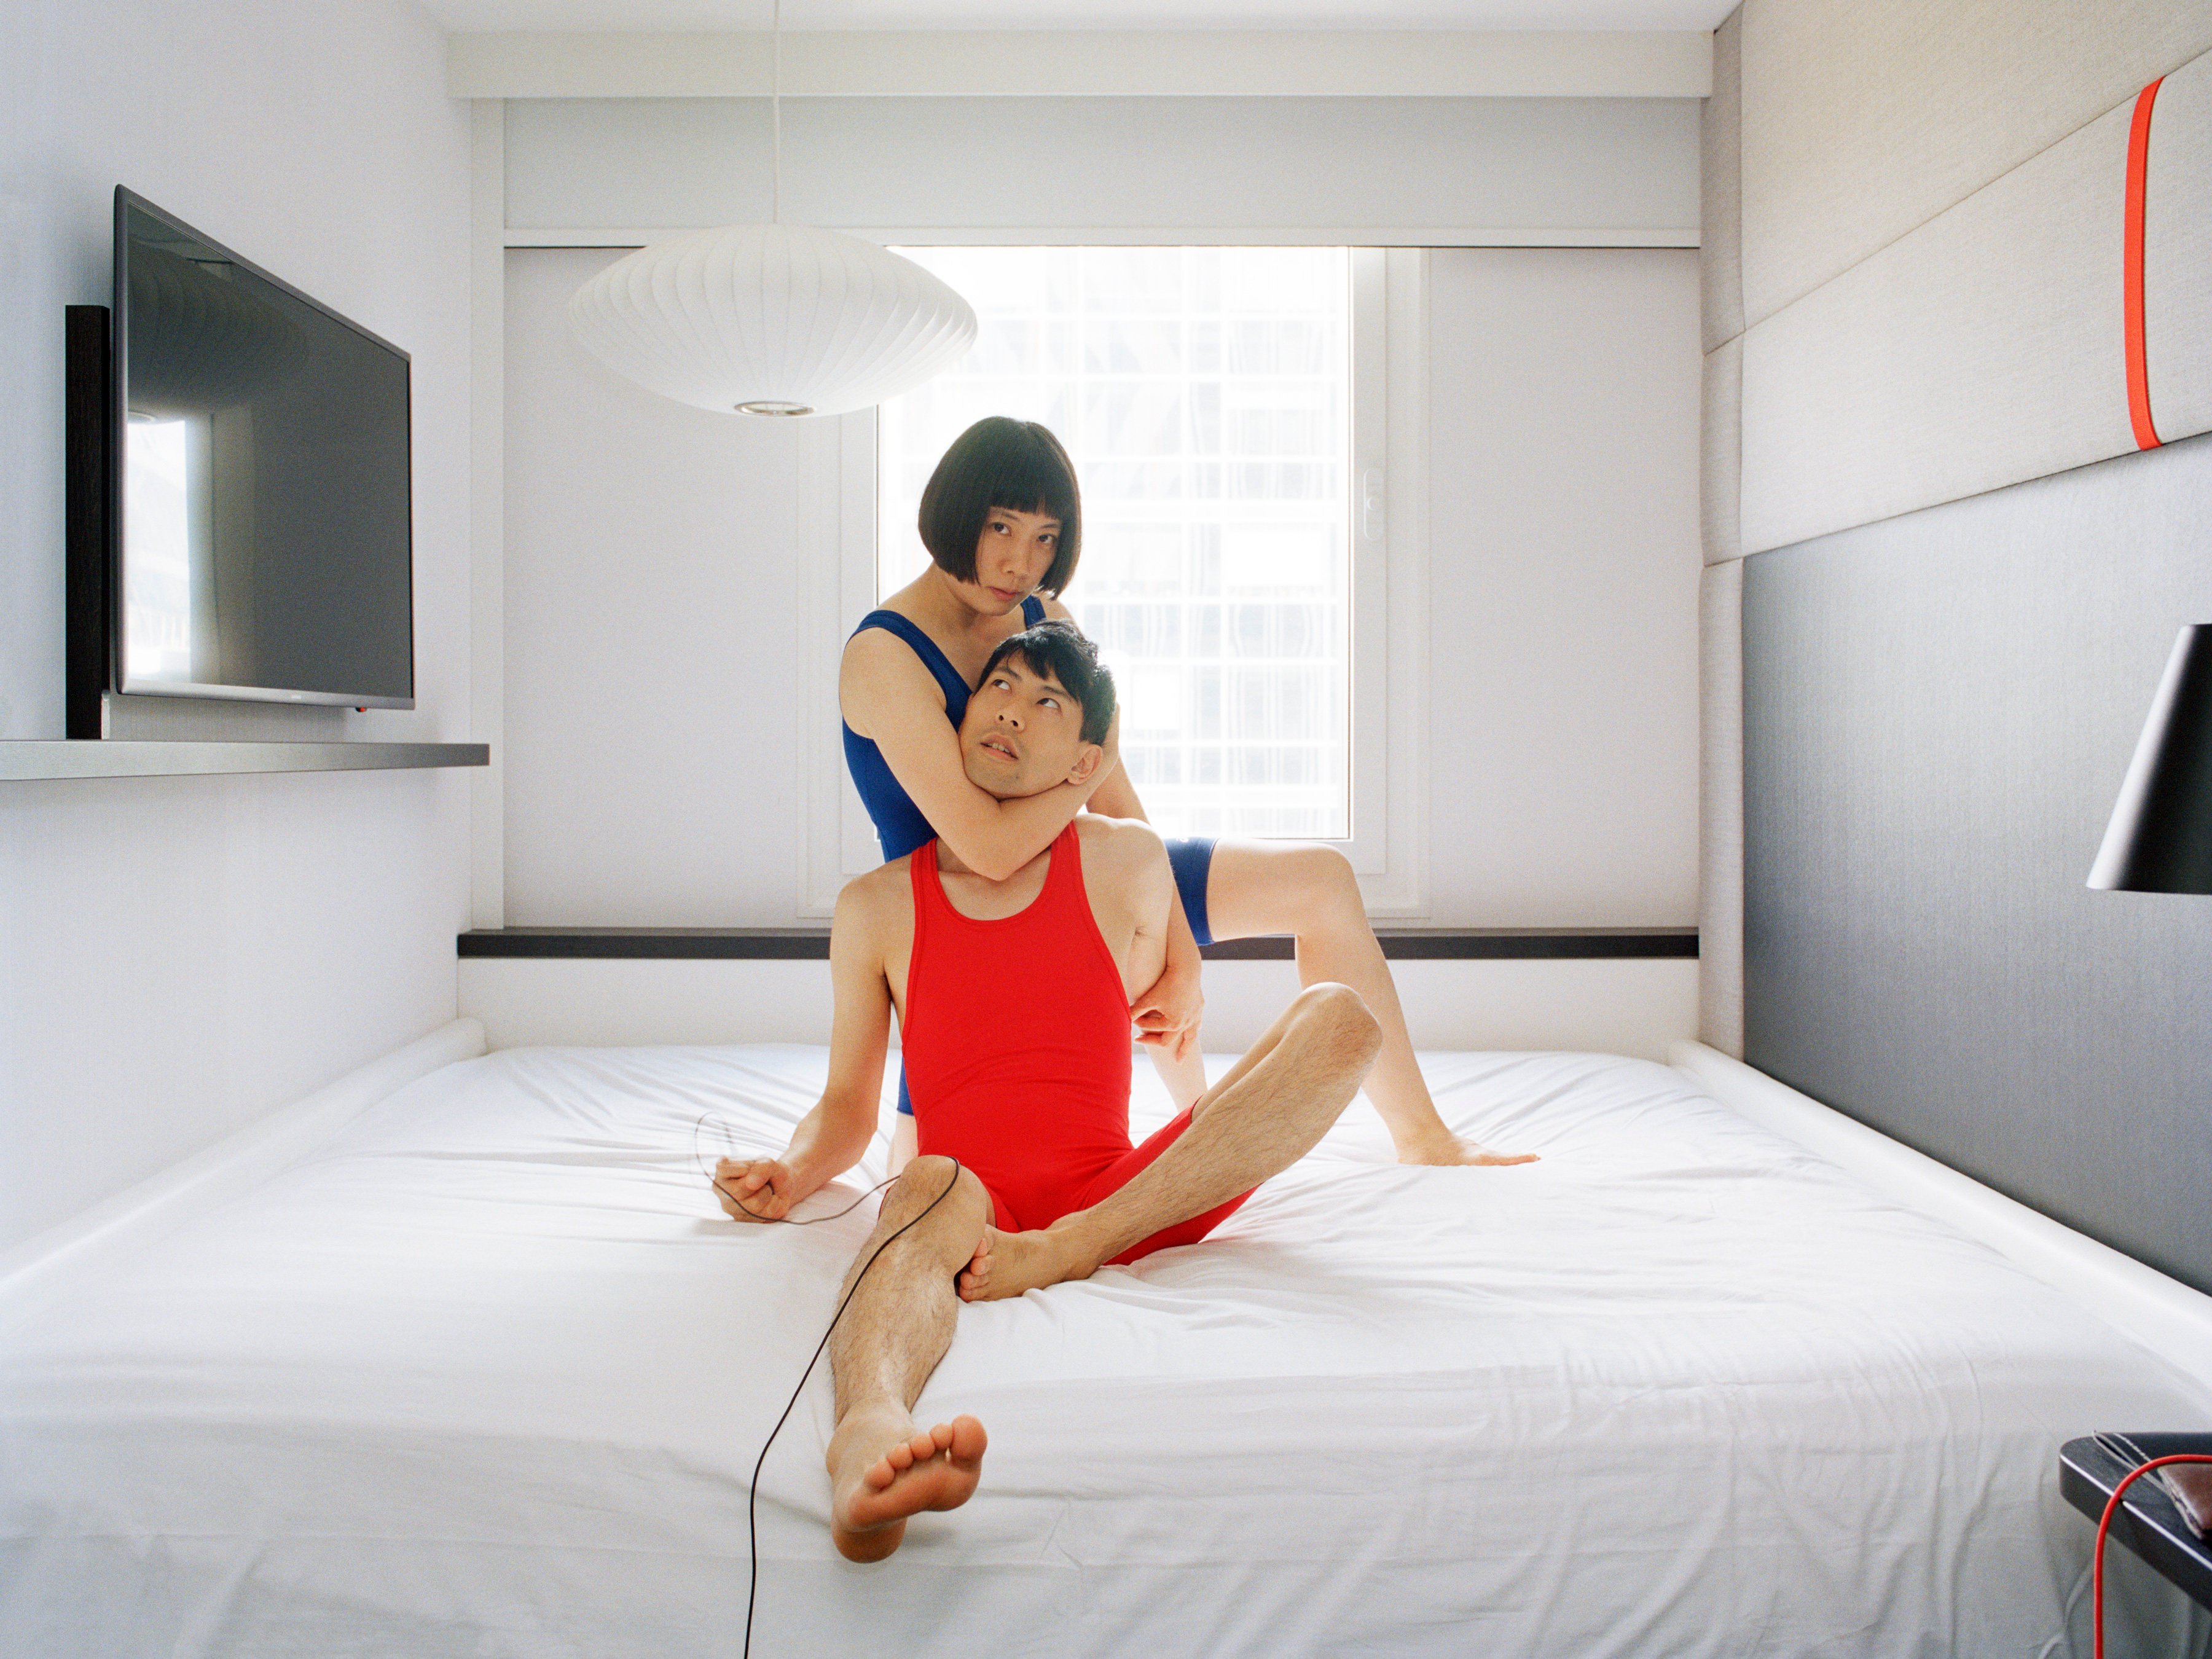 Pixy Liao’s Bed Wrestling 3014 (Rear Chin Lock), 2019. Photo: Pixy Liao / Blindspot Gallery